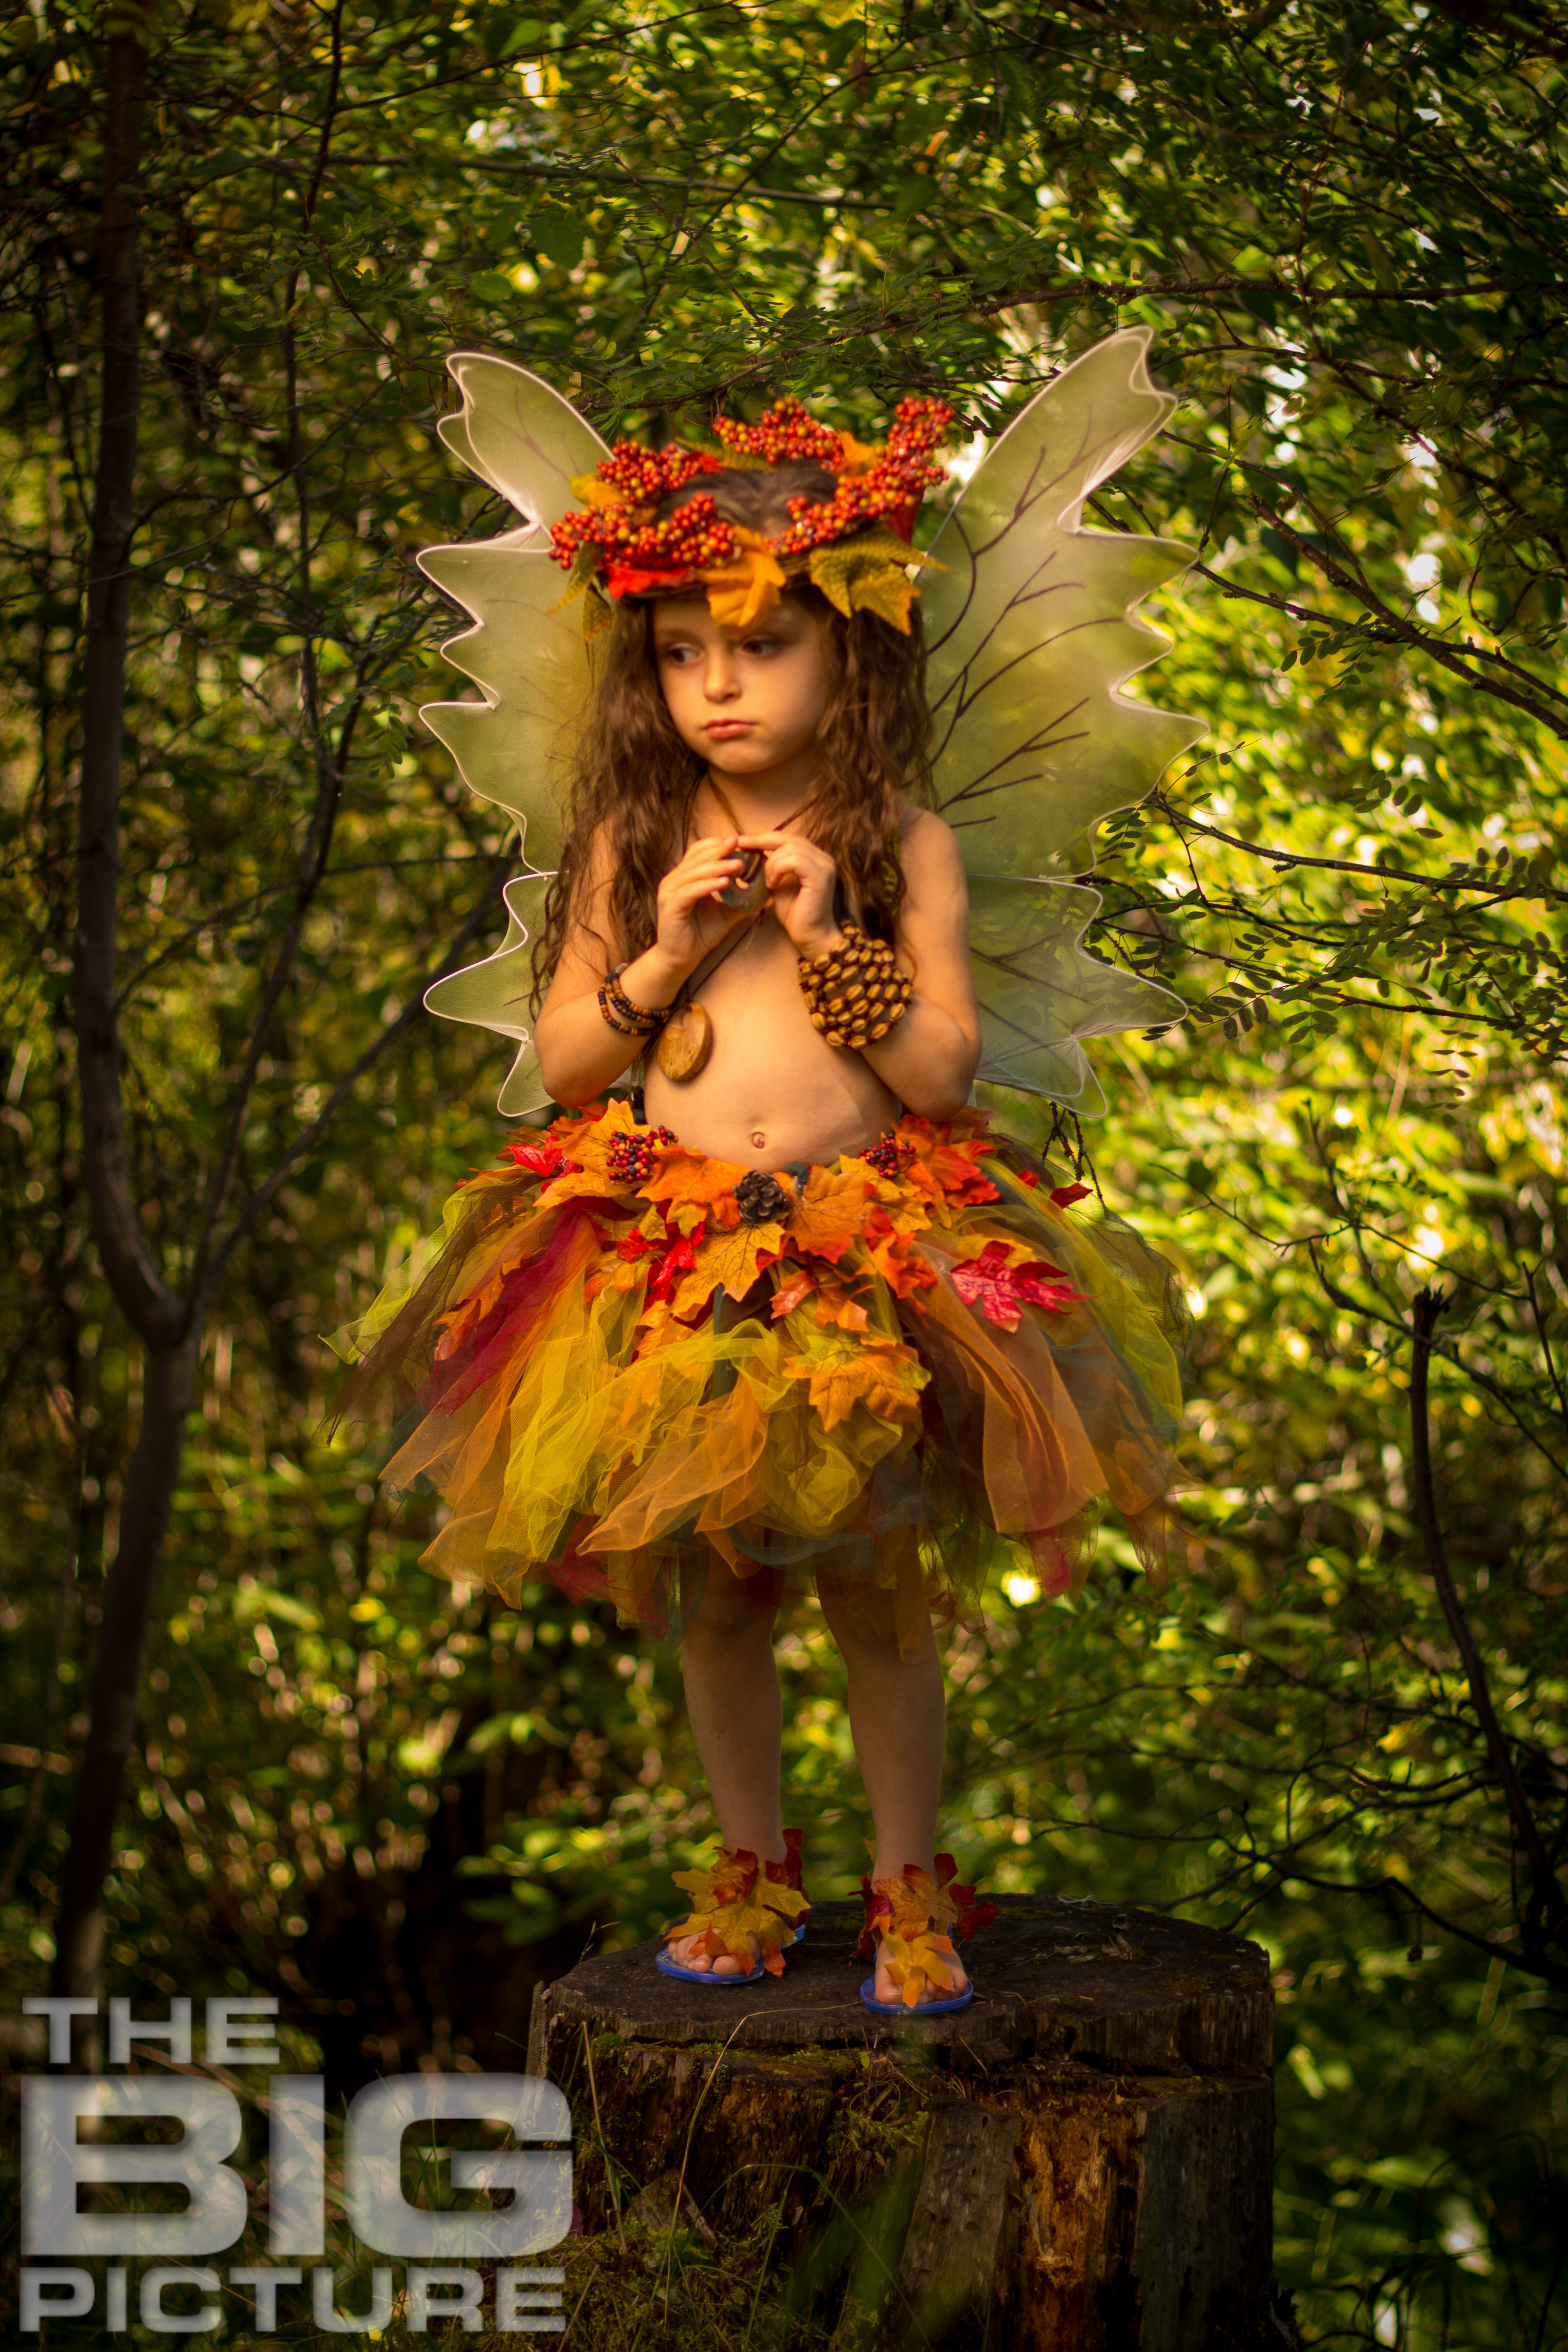 photographing difficult children, learn children's photography, little girl dressed up as a fairy, fairy costume